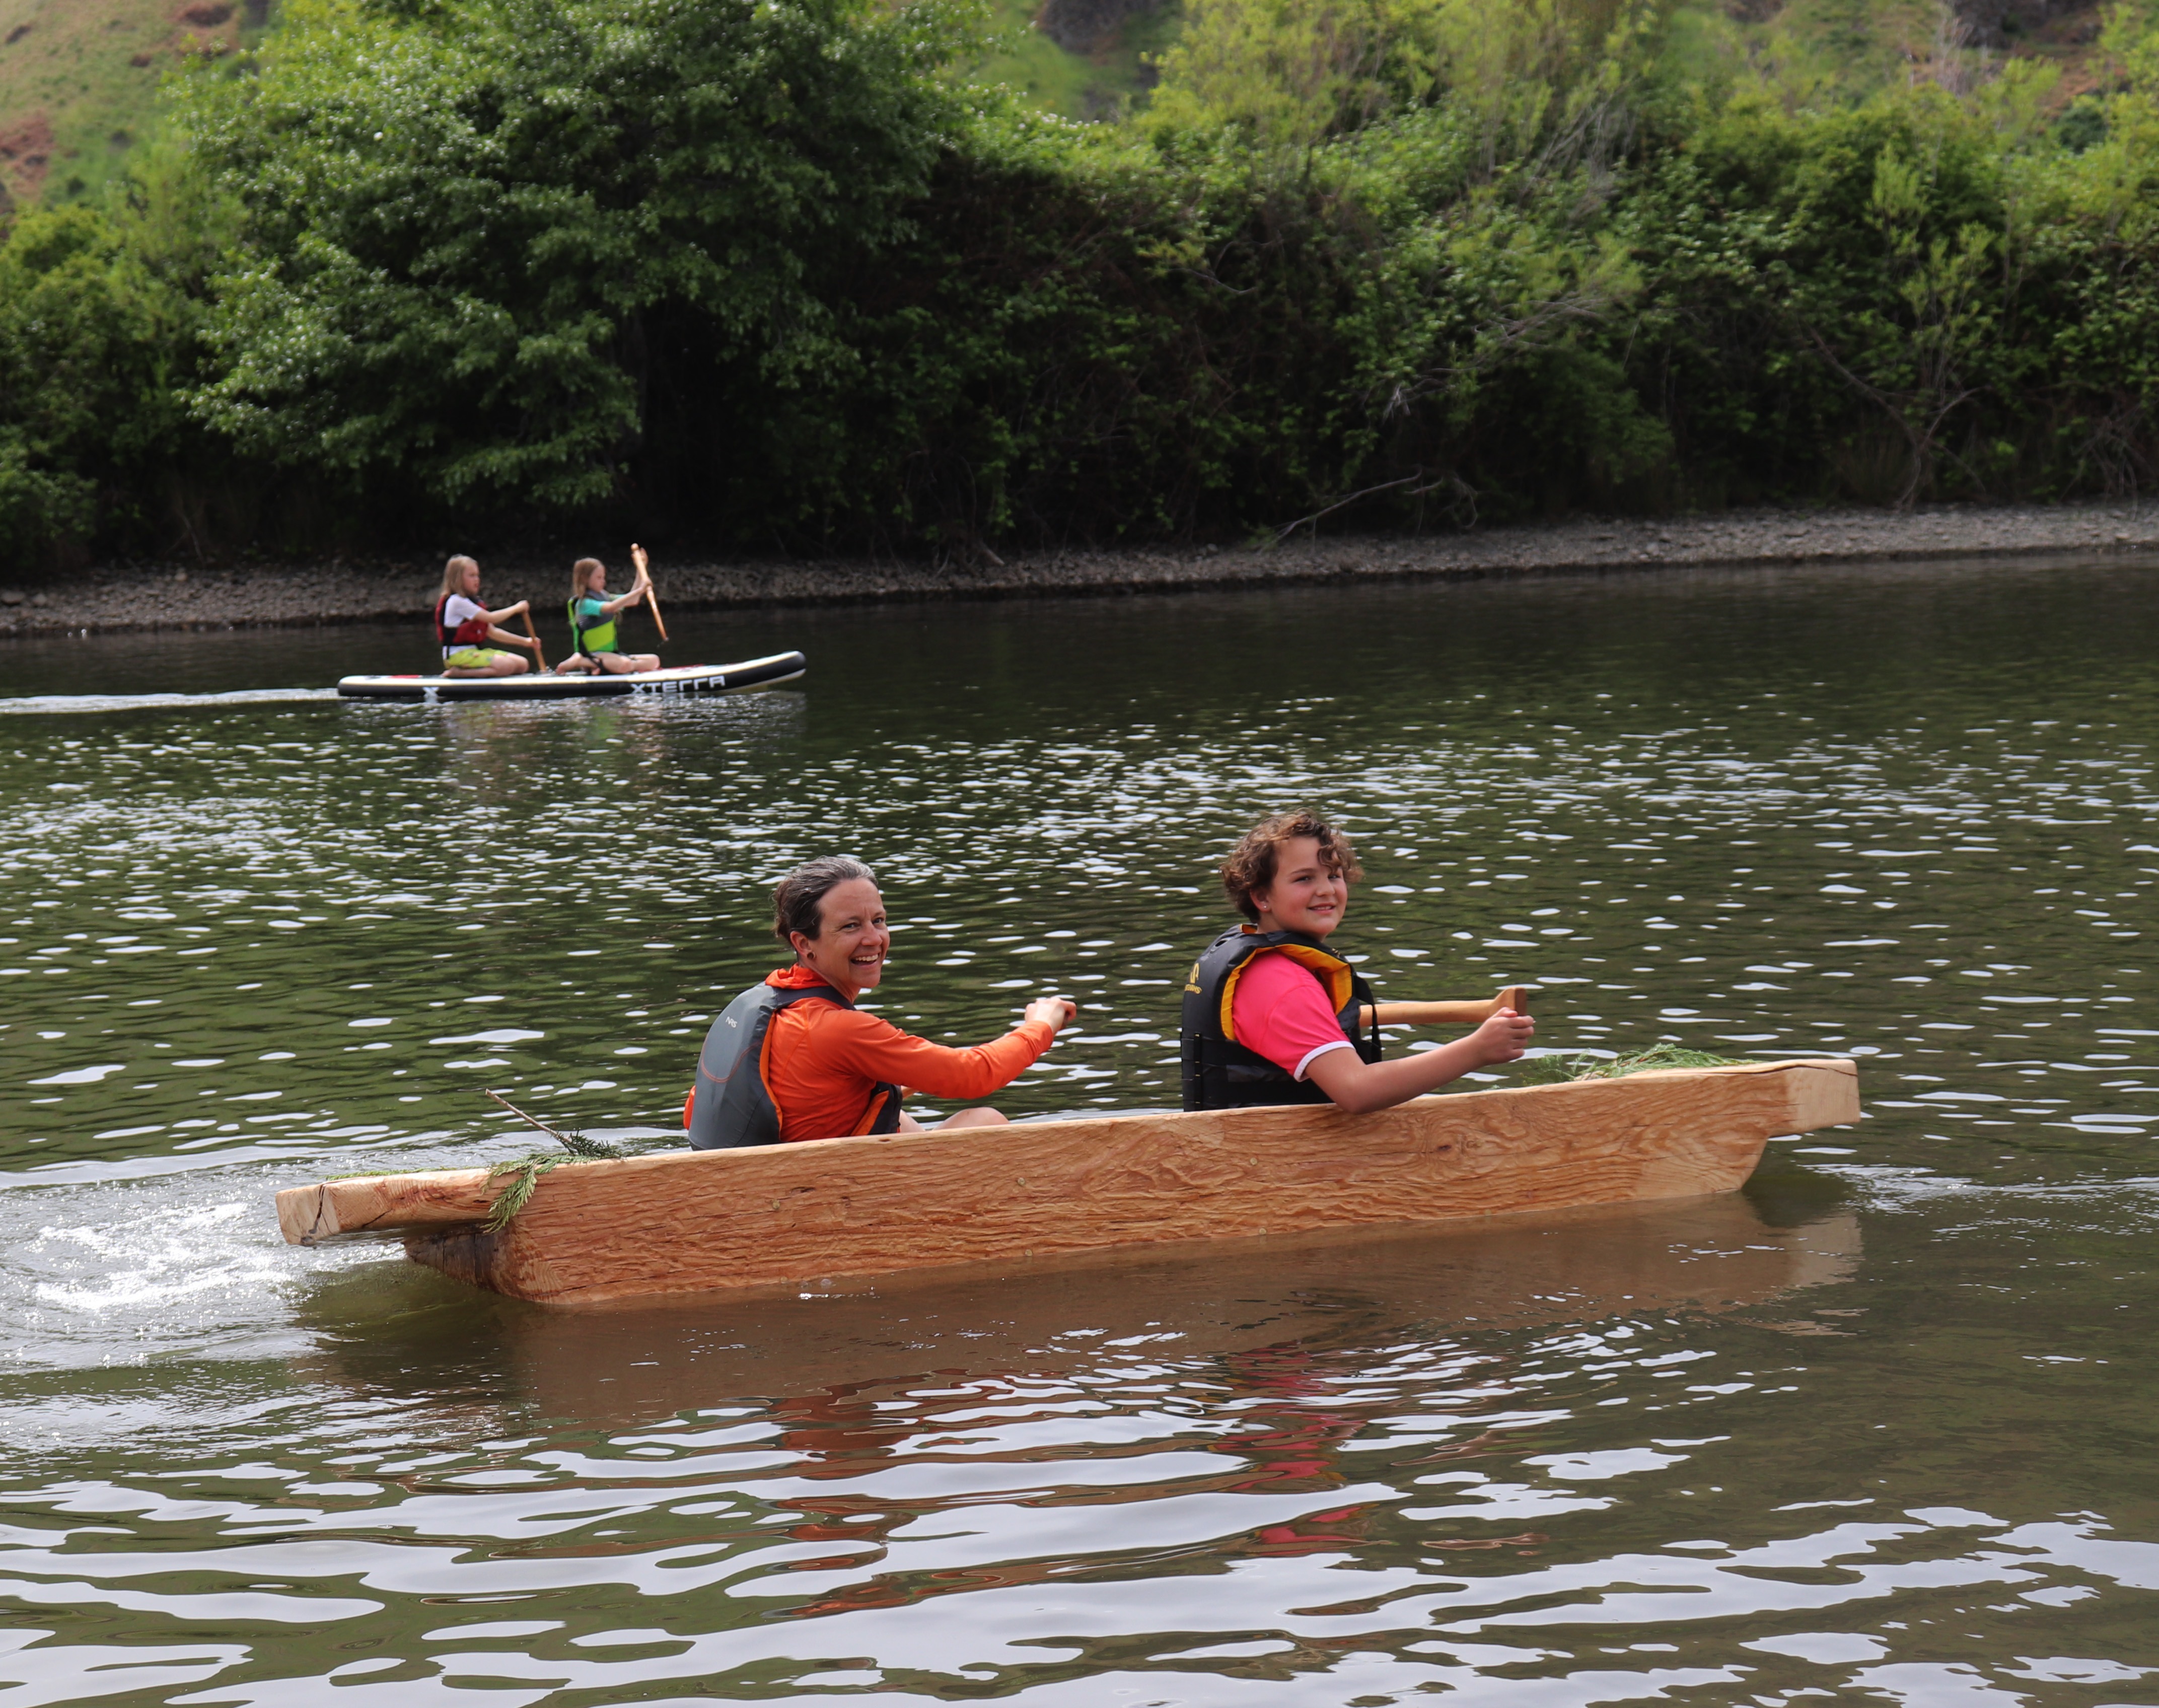 Lauren Venzke and Renée Hill row across the water in a dugout canoe.